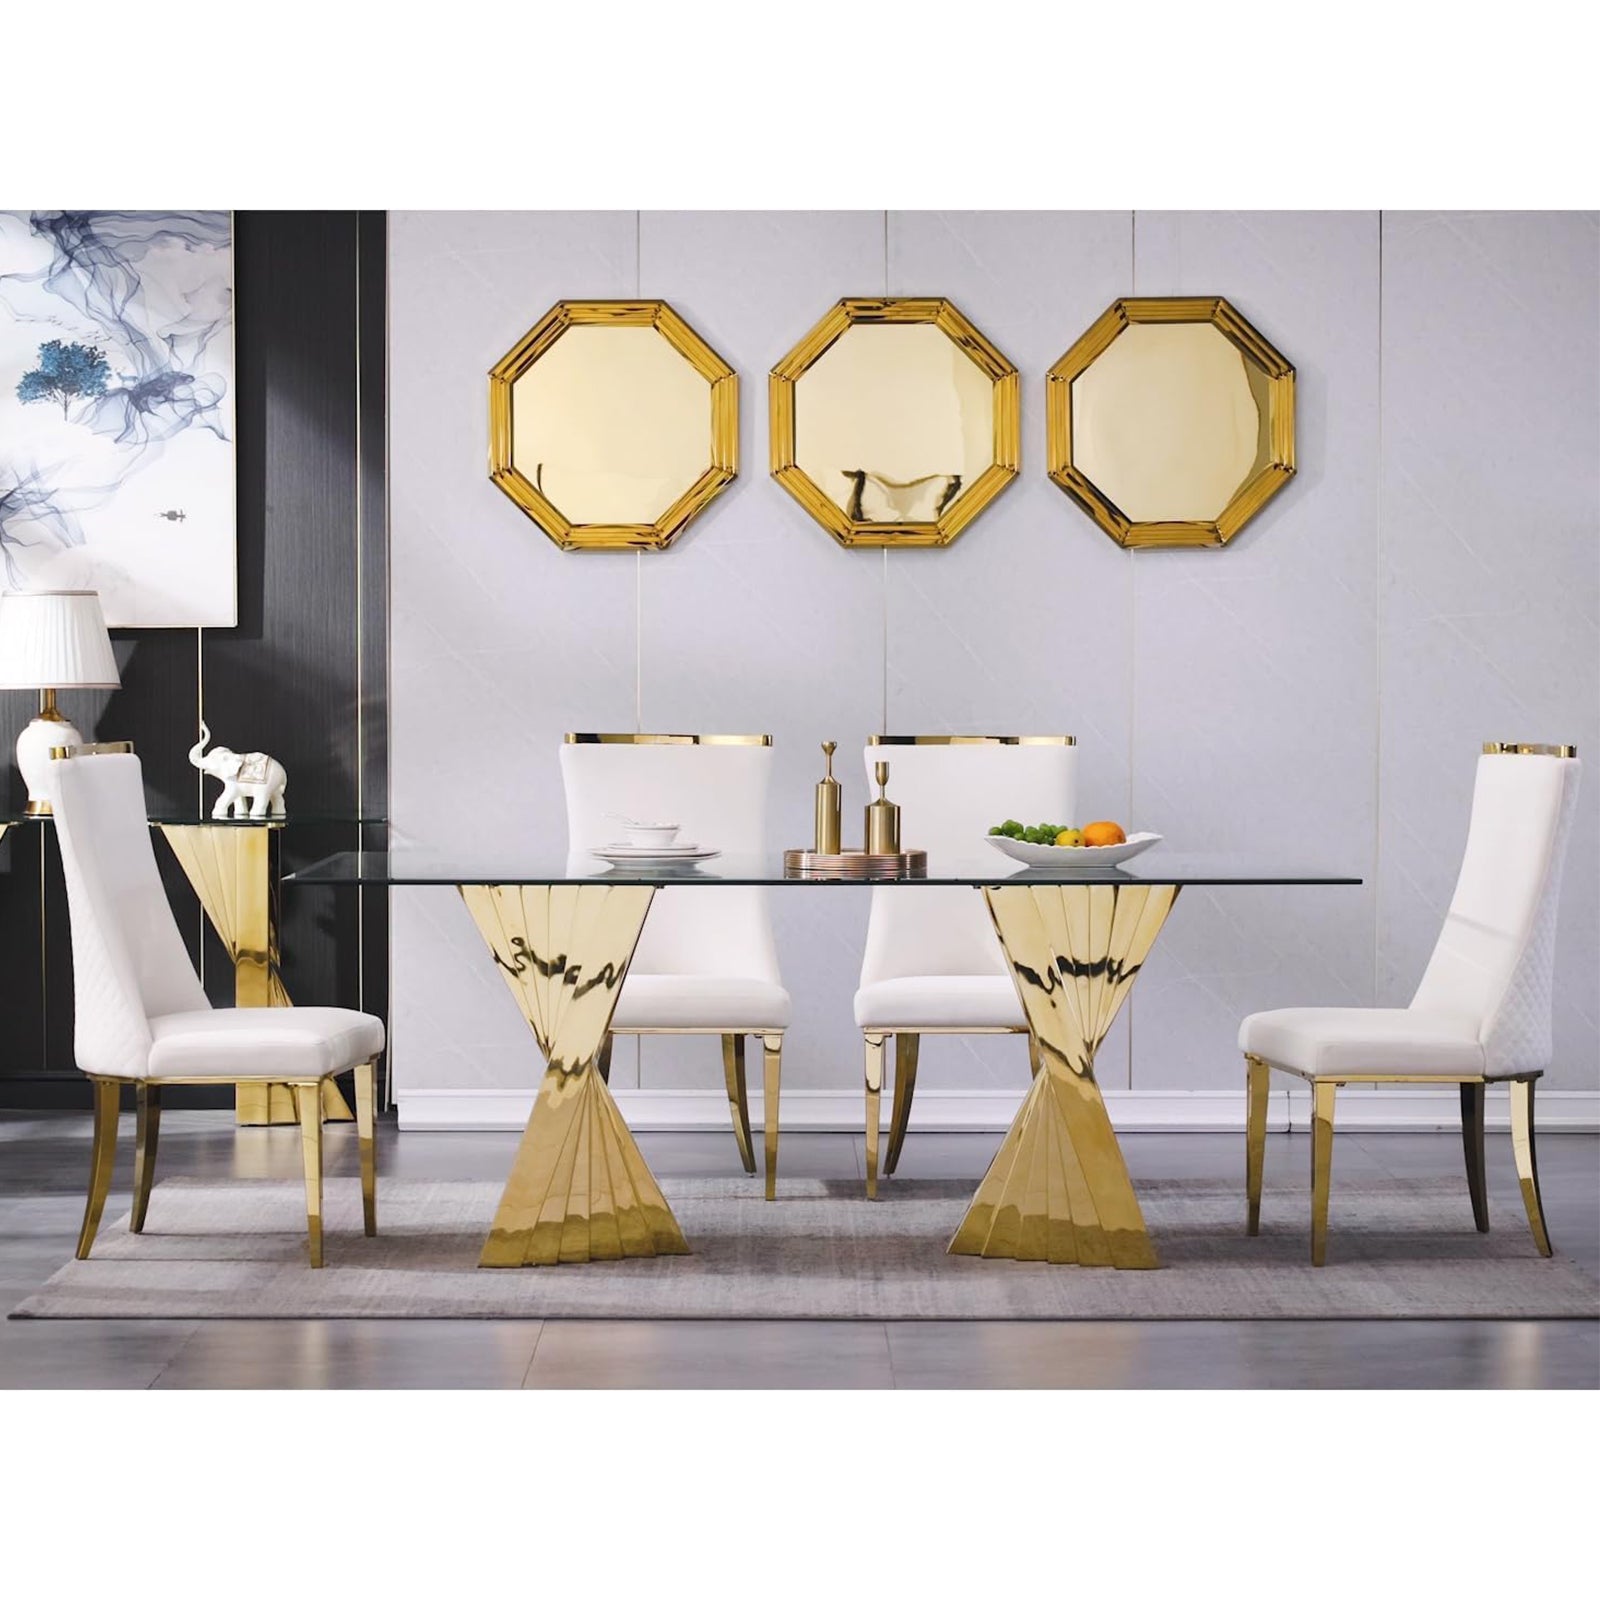 White Velvet Dining Chairs | Reticulate Texture Back| Gold Metal Legs | C137